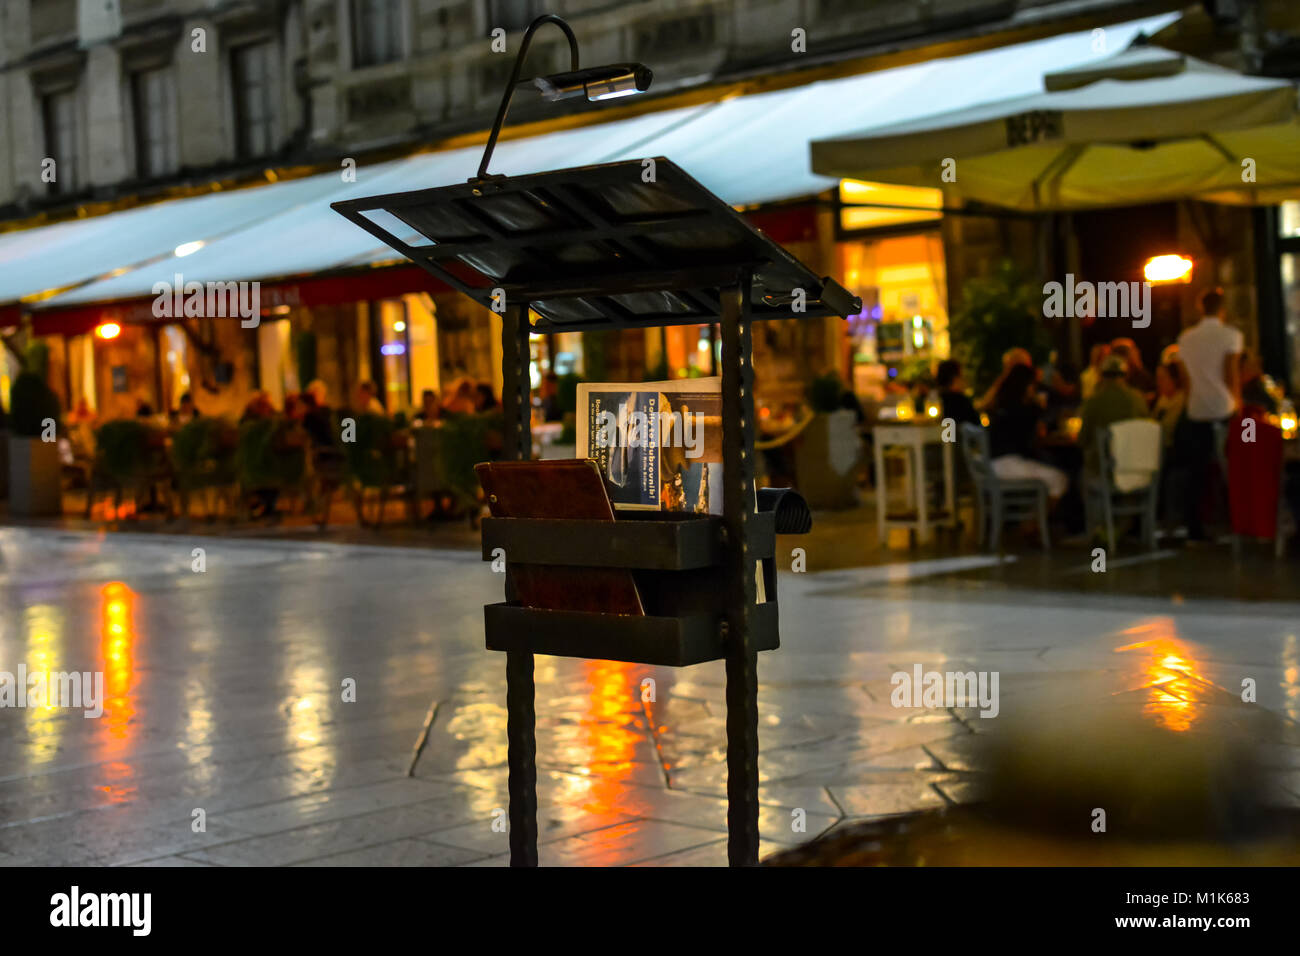 A lighted menu stand advertises a sidewalk cafe late night in Peoples Square in Split Croatia as diners enjoy a meail Stock Photo